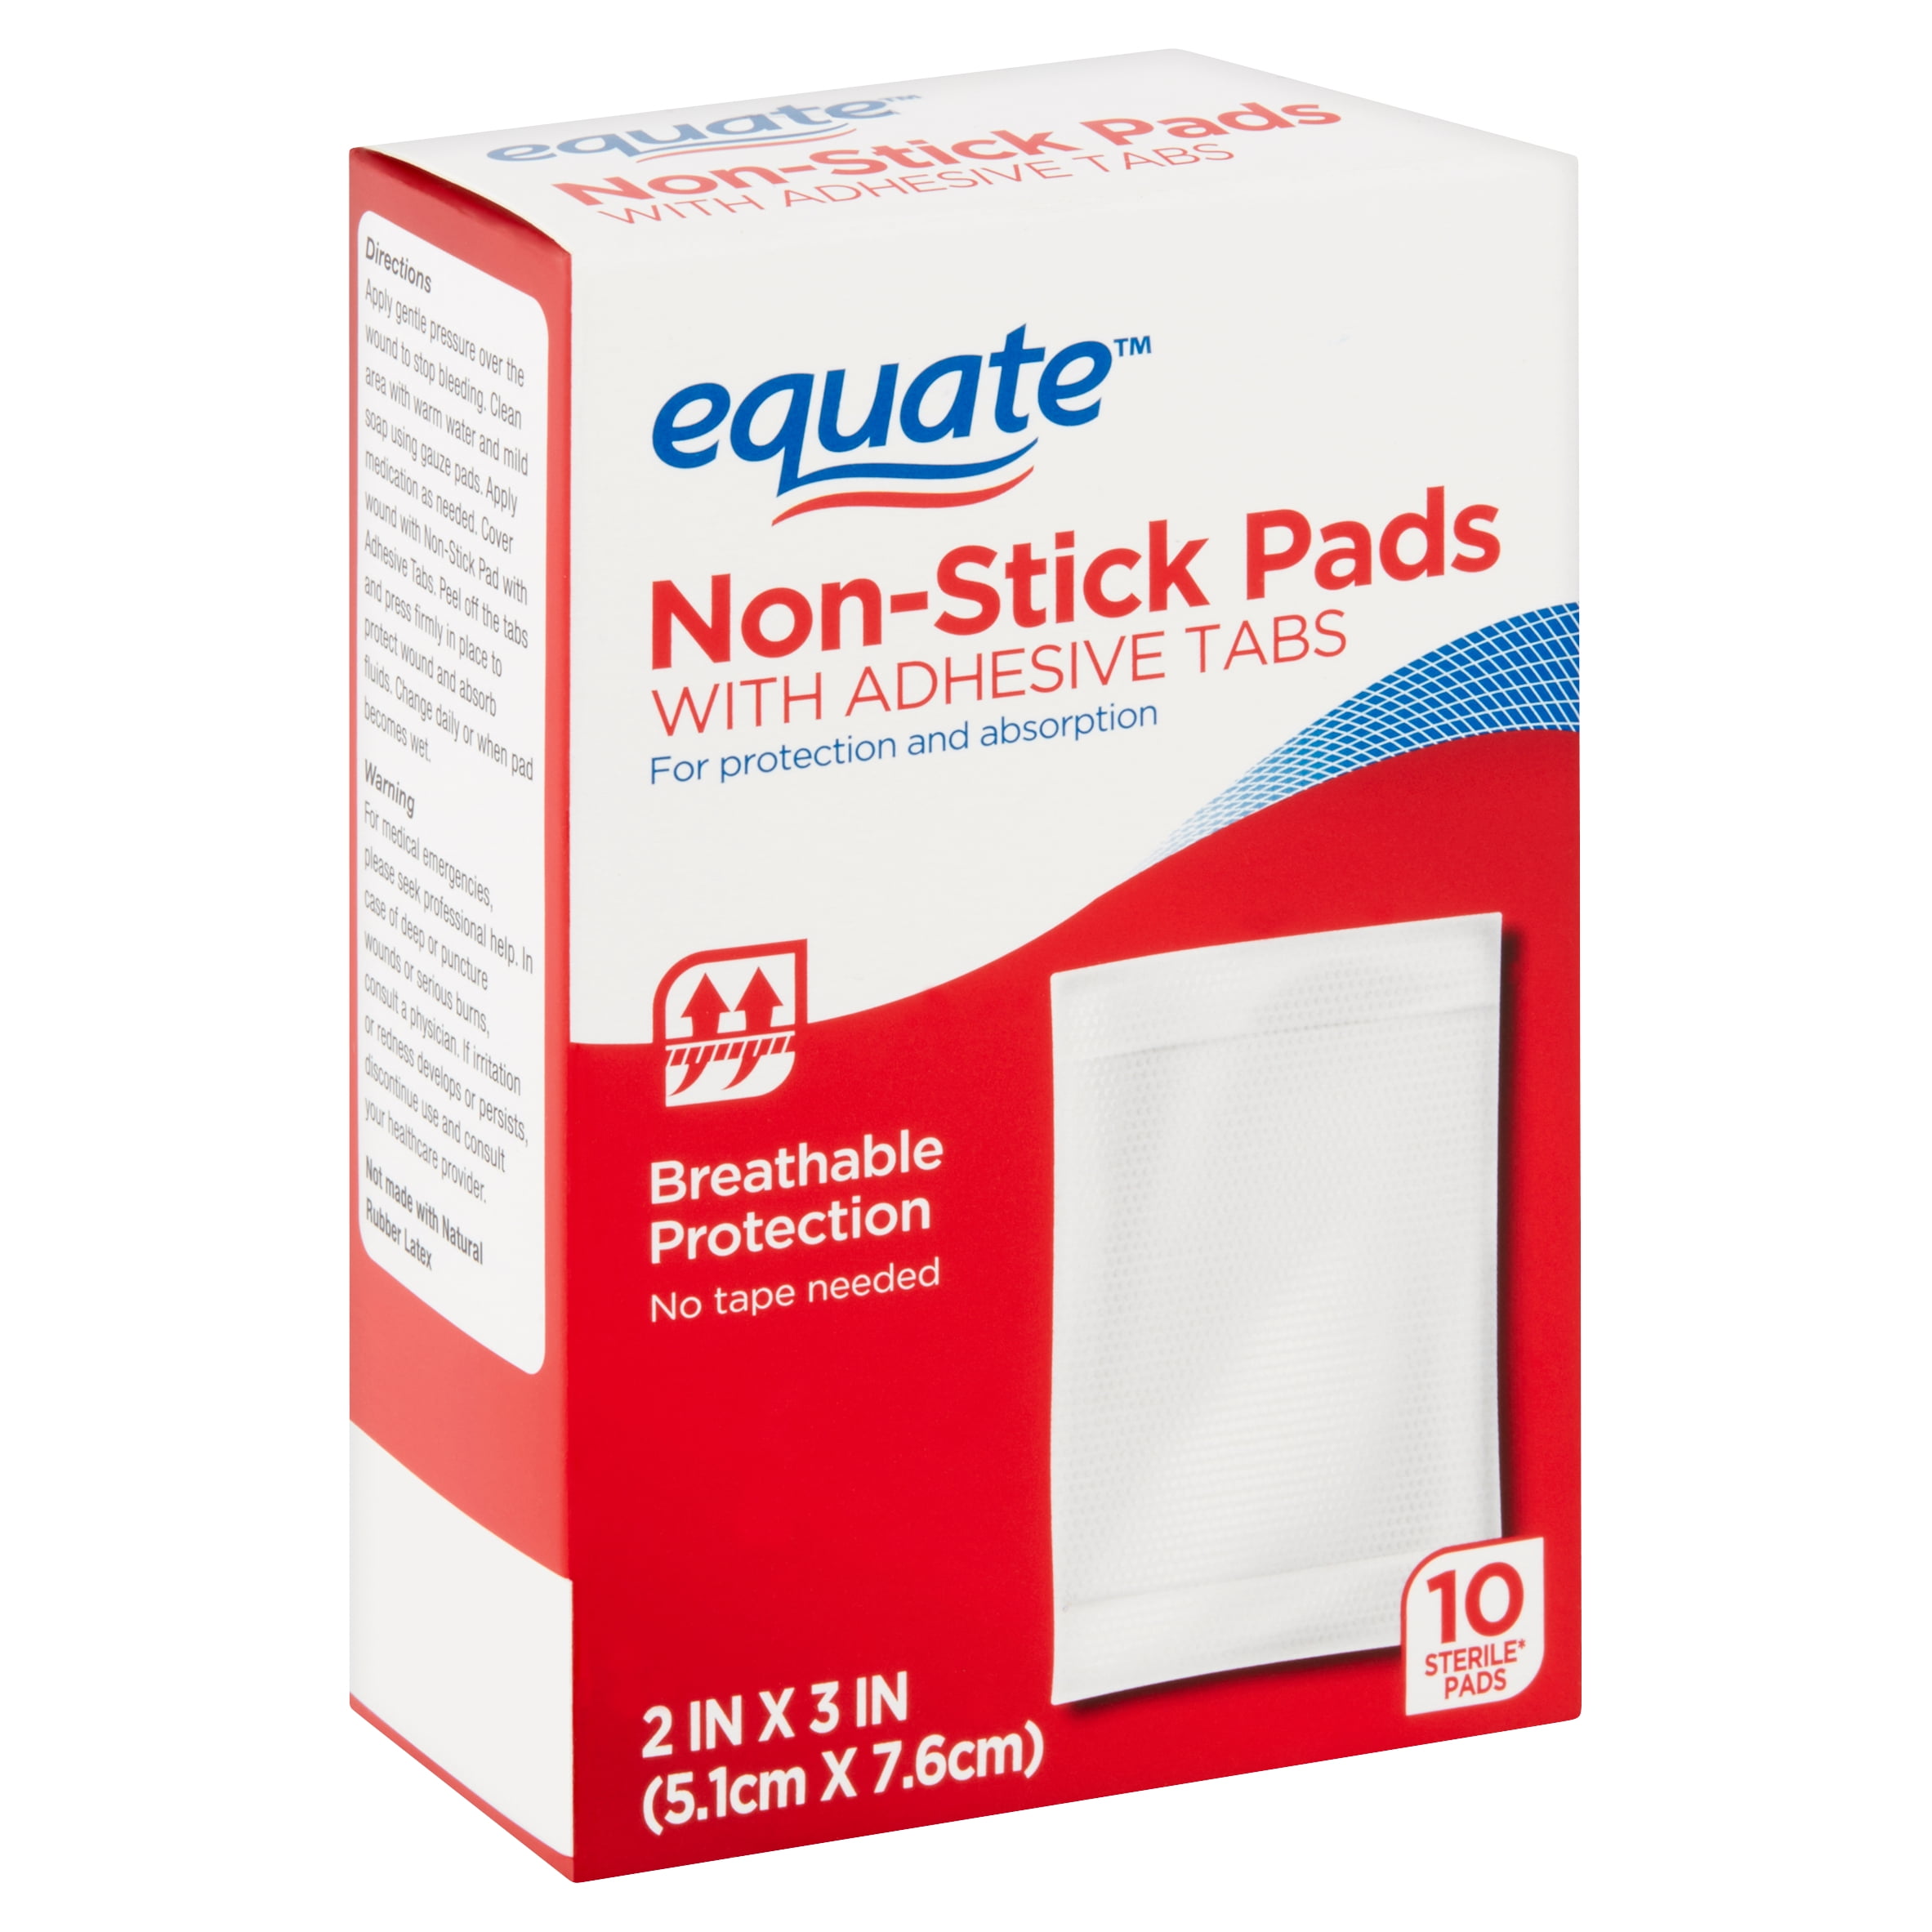 Equate NonStick Pads with Adhesive Tabs, 10 count